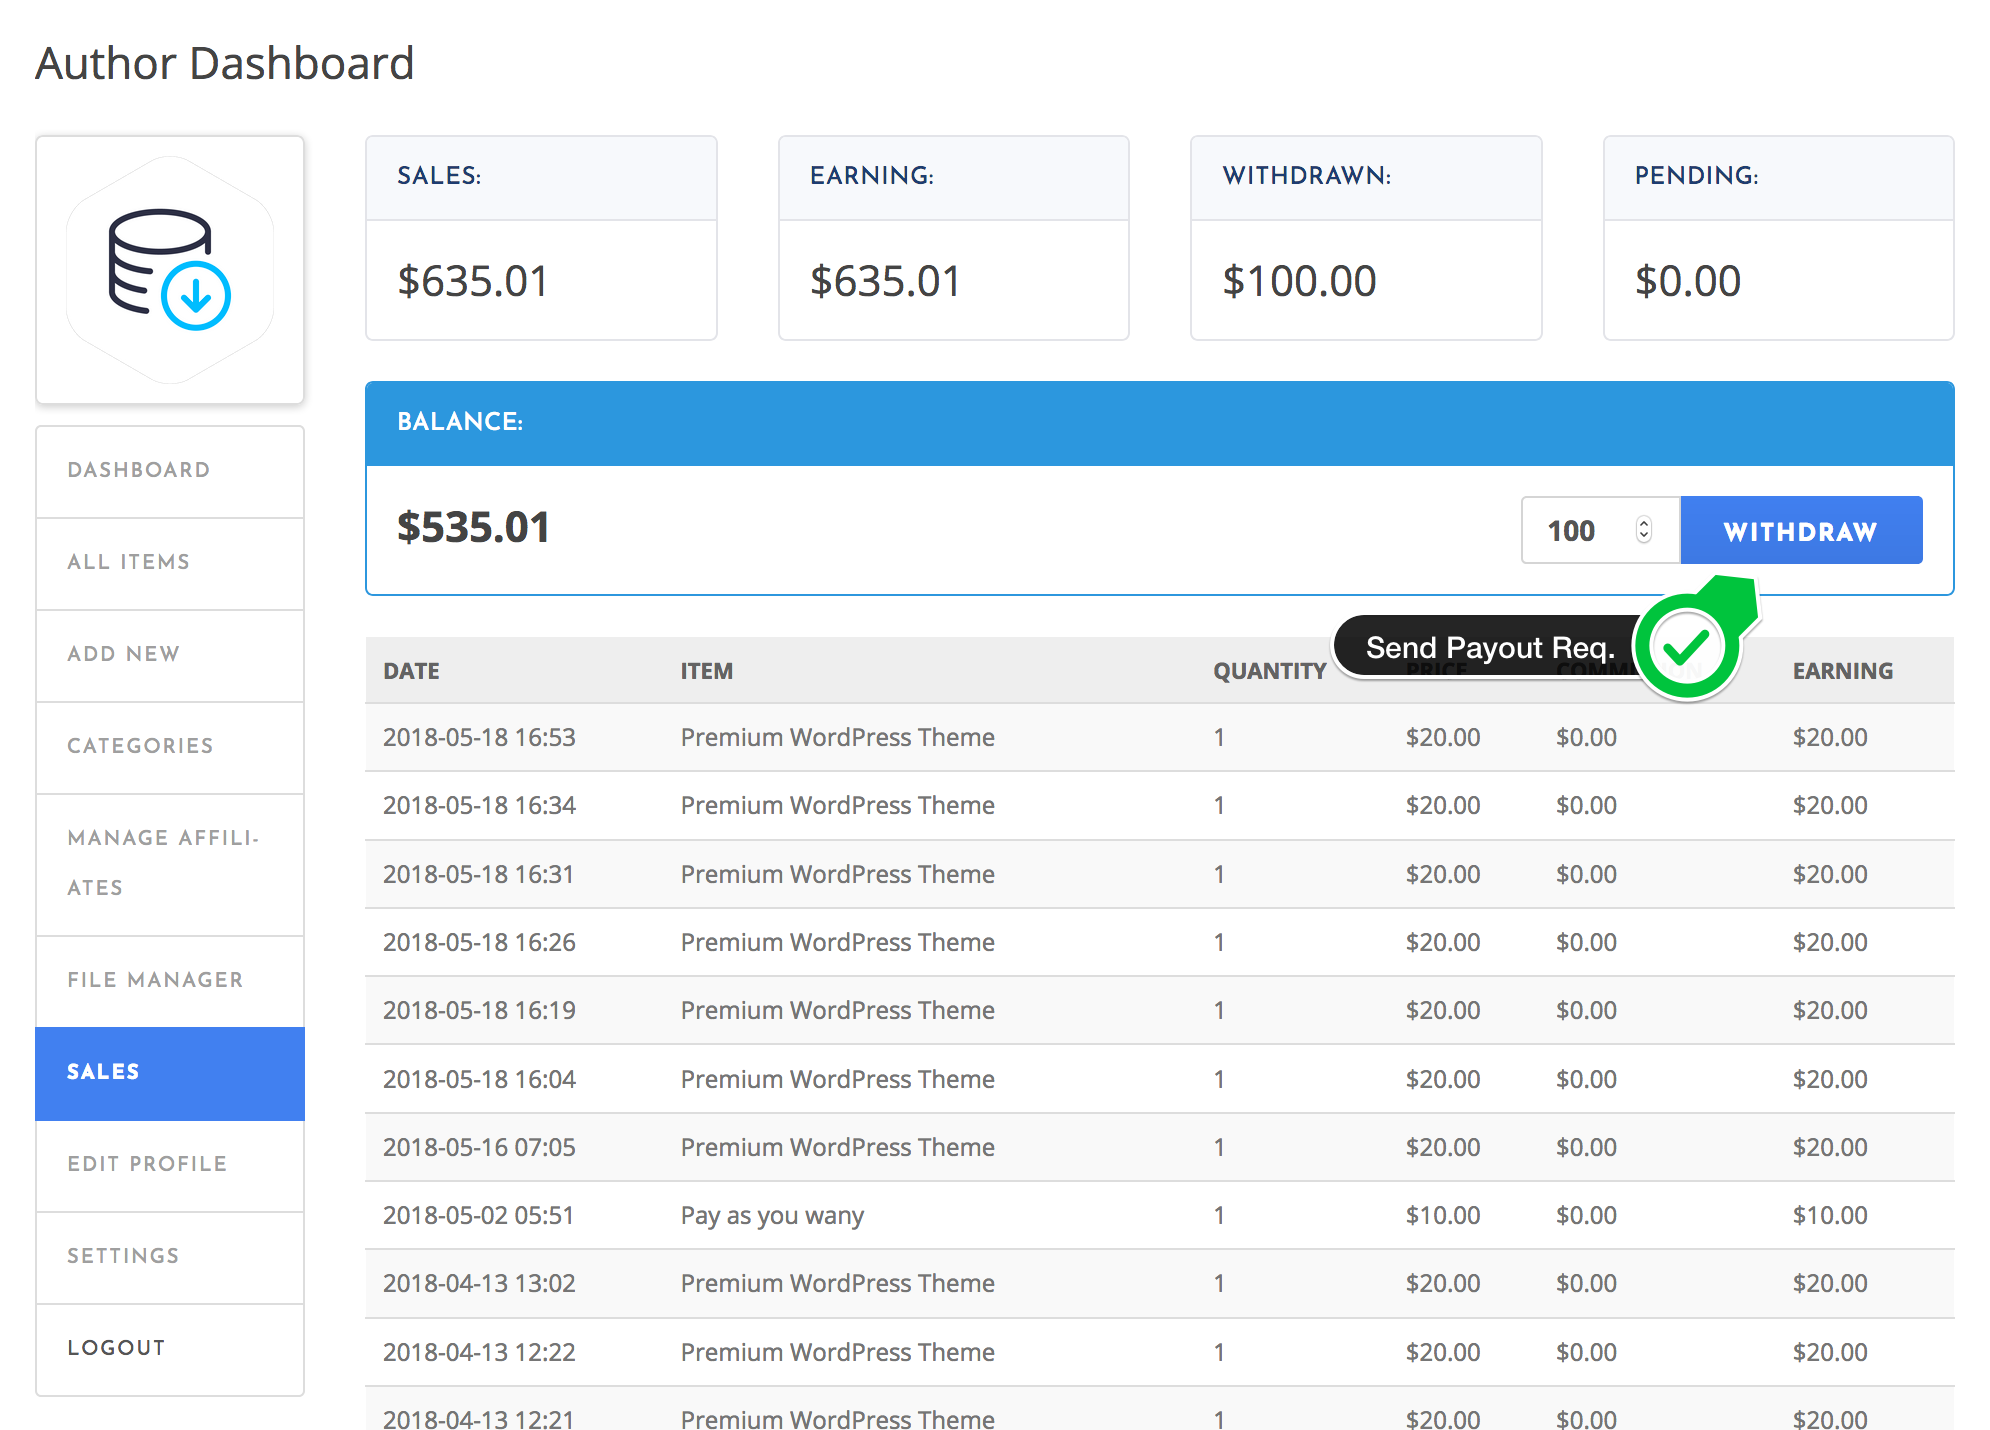 Send Payout Request - Author Dashboard - WordPress Download Manager